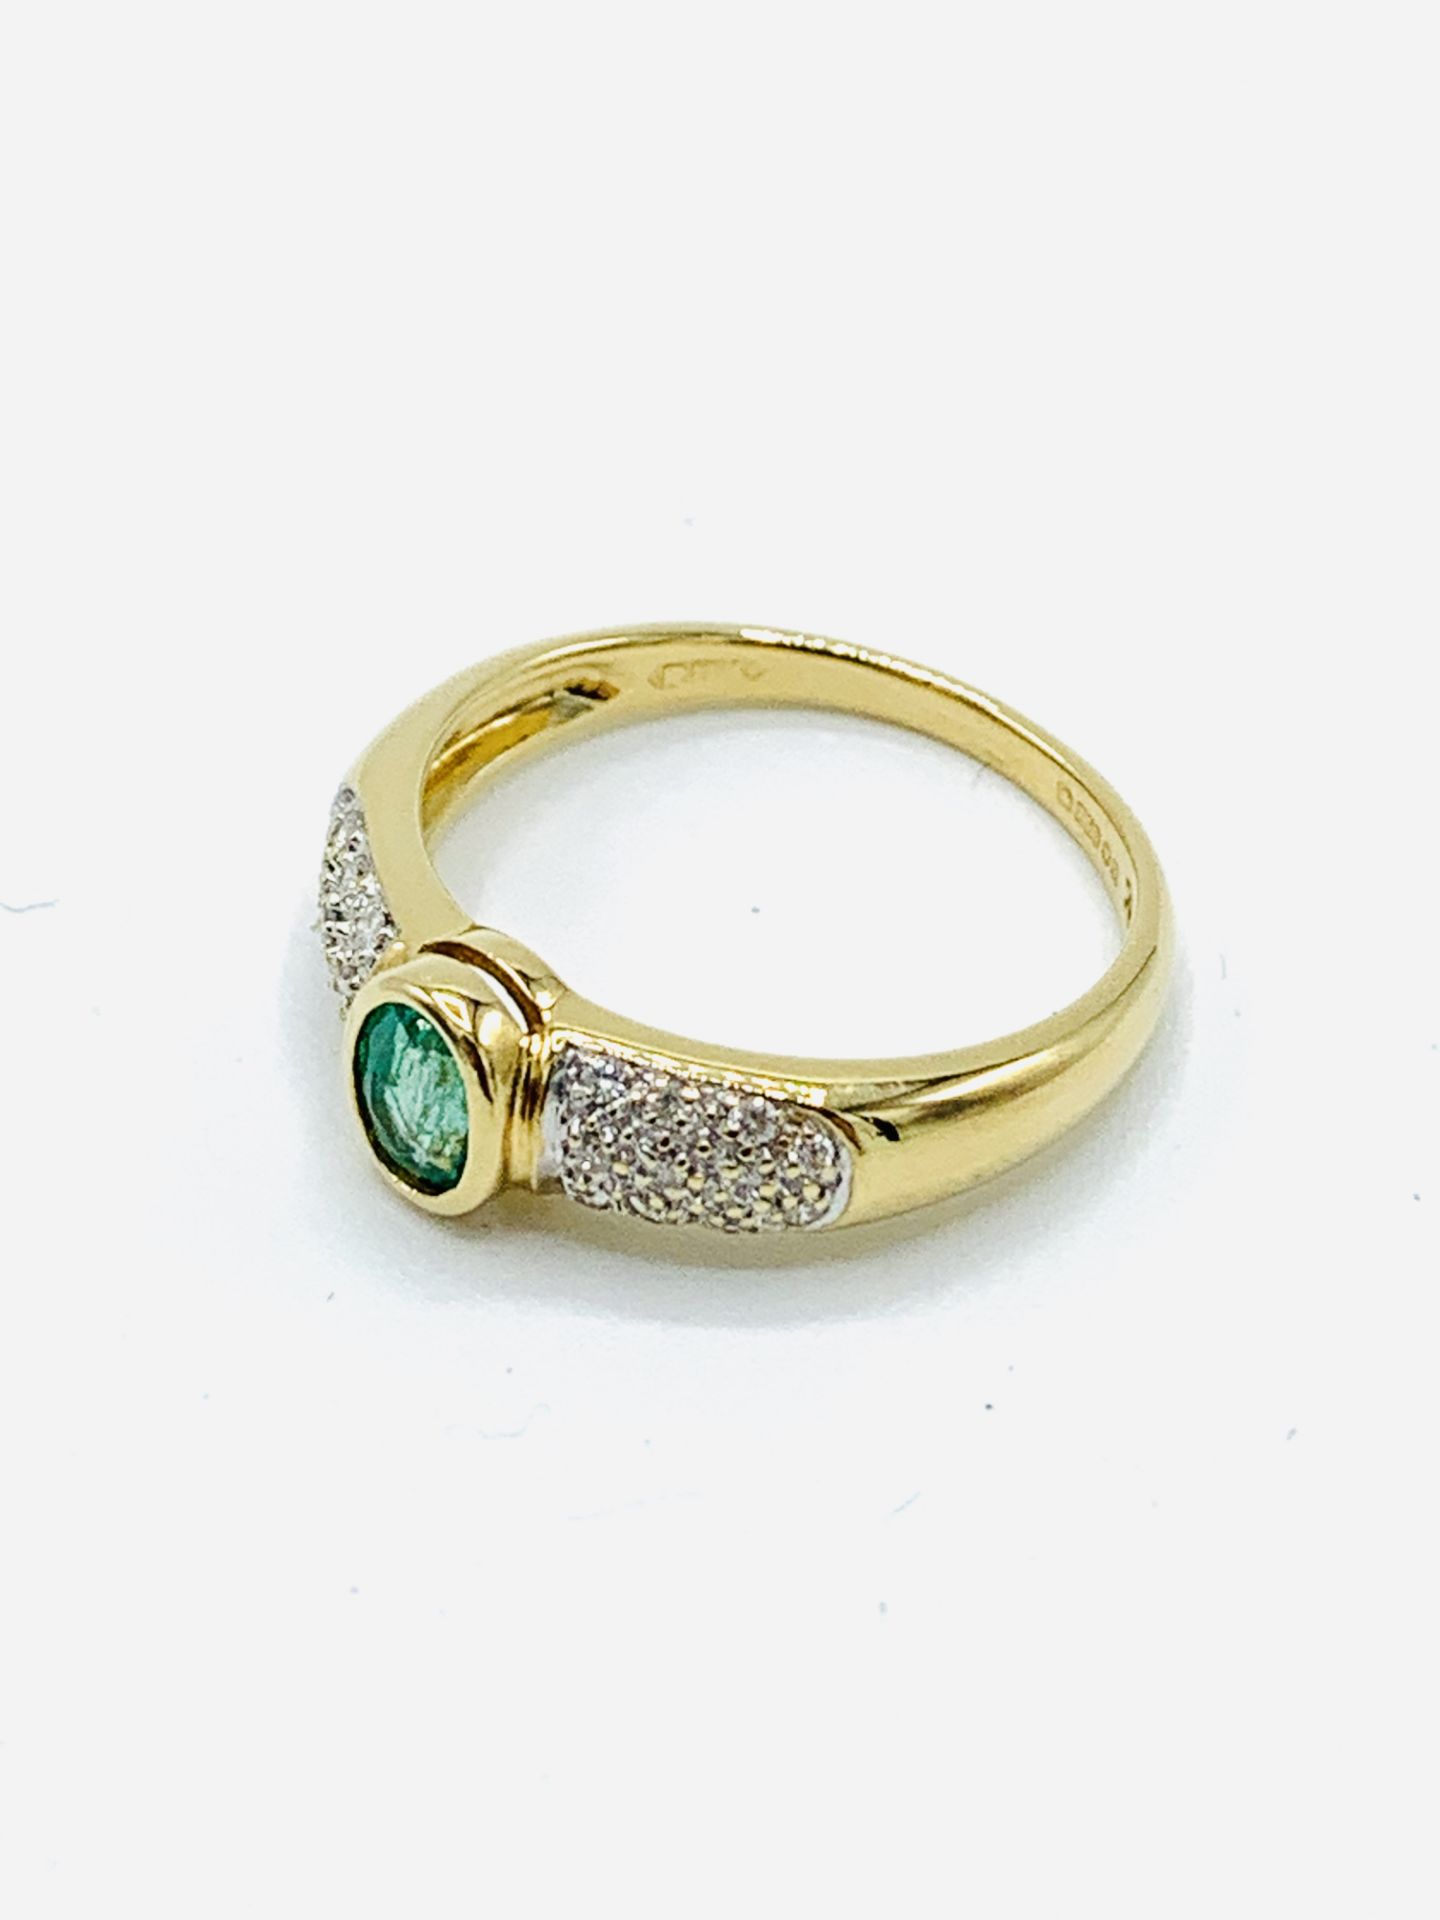 18ct gold emerald and diamond ring - Image 5 of 5